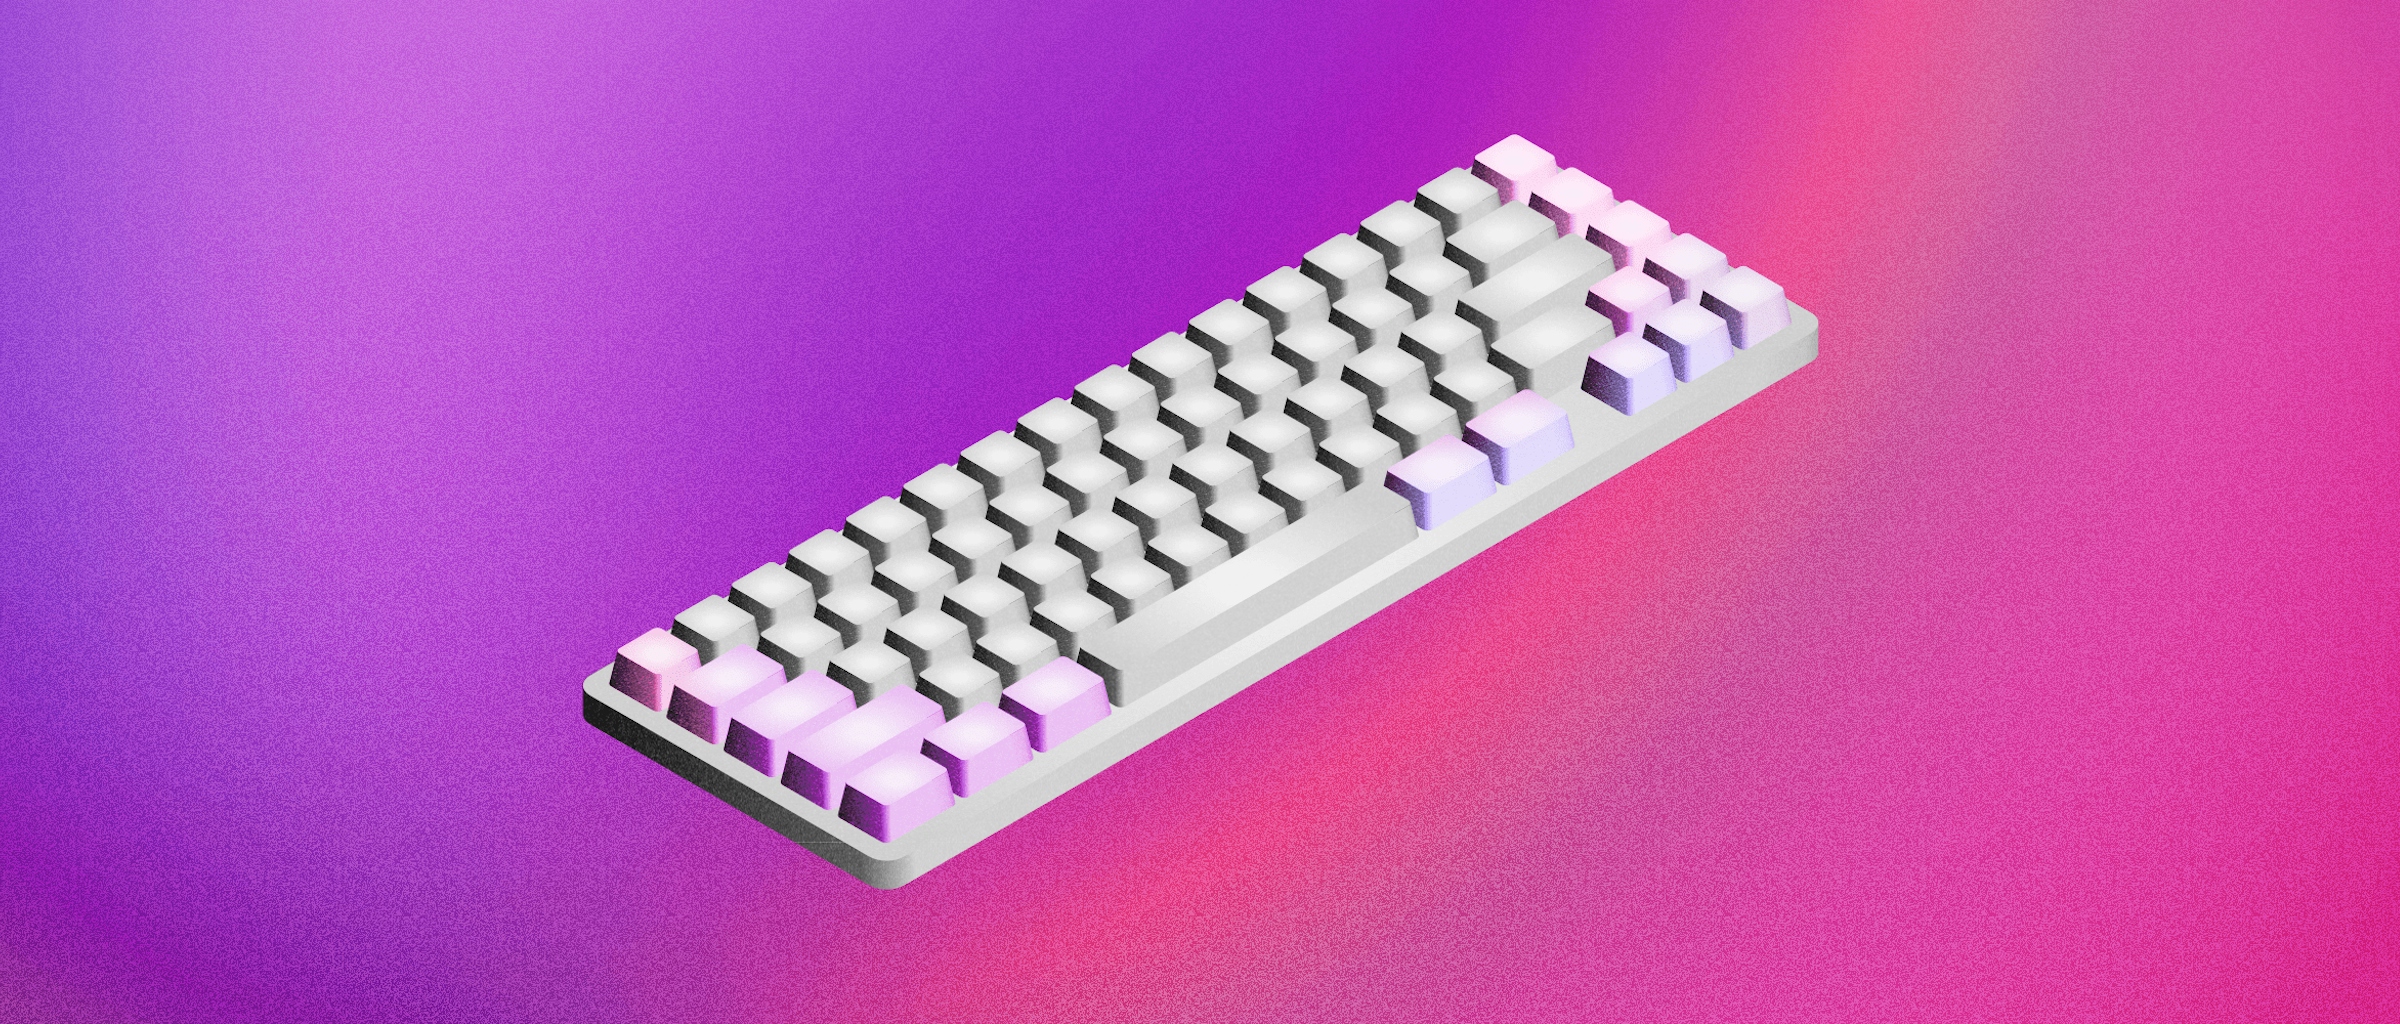 An illustrated image of a grey keyboard from an isometric perspective, showing on a purple background